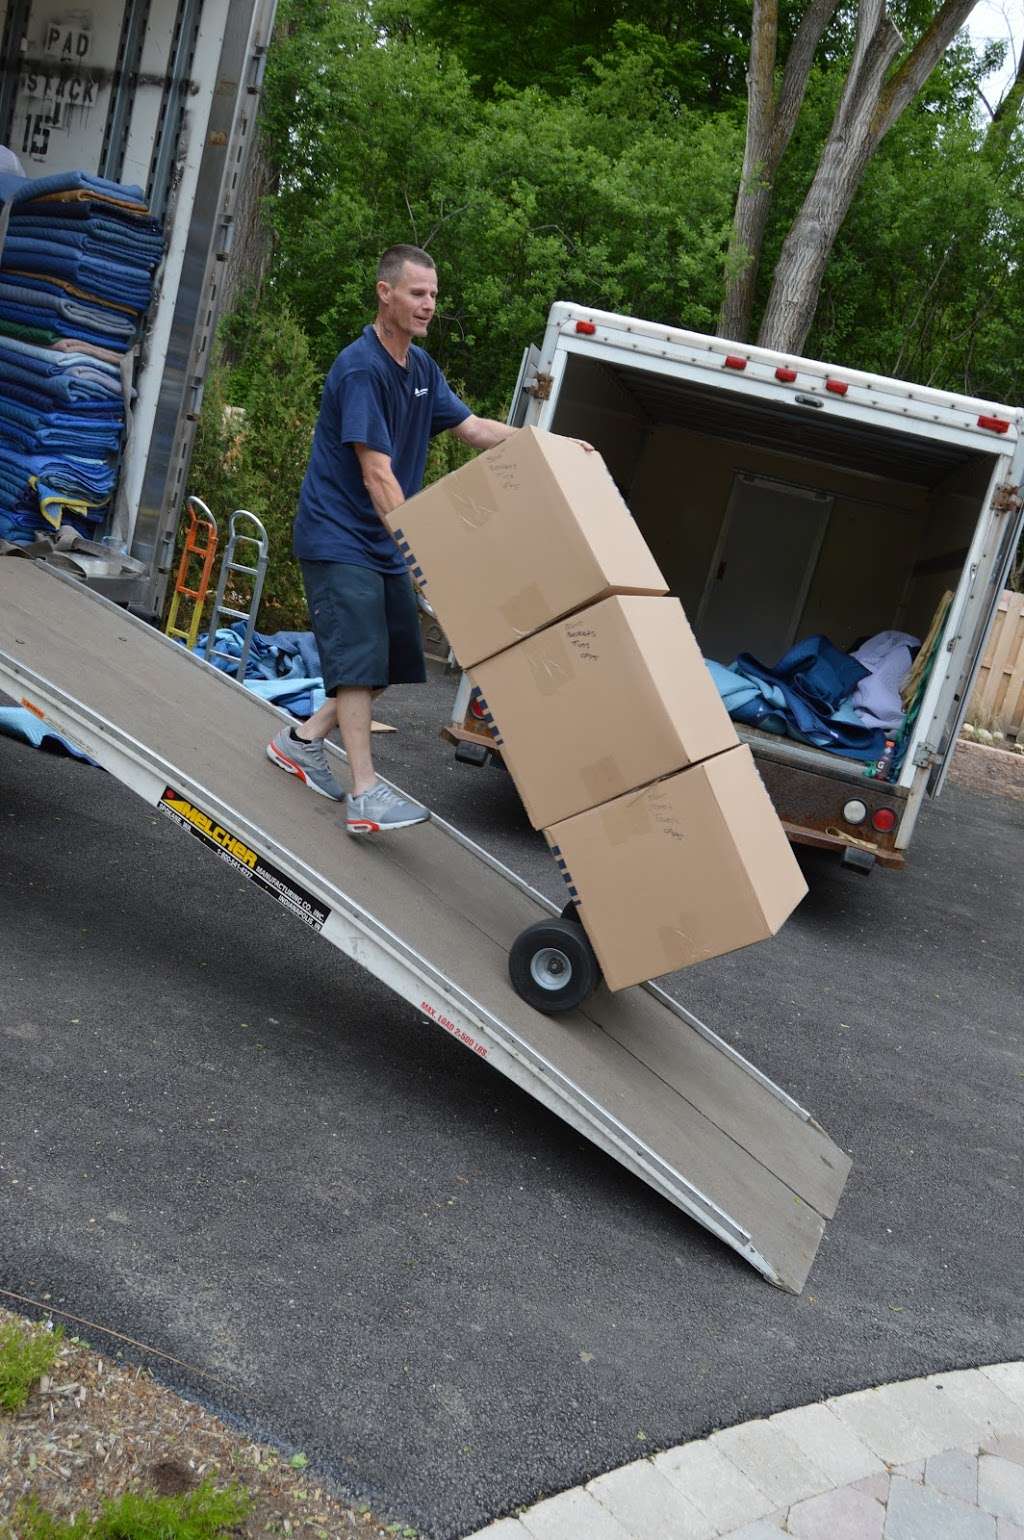 A. Best Movers, Inc. | 1941 Industrial Dr, Libertyville, IL 60048 | Phone: (847) 996-6757